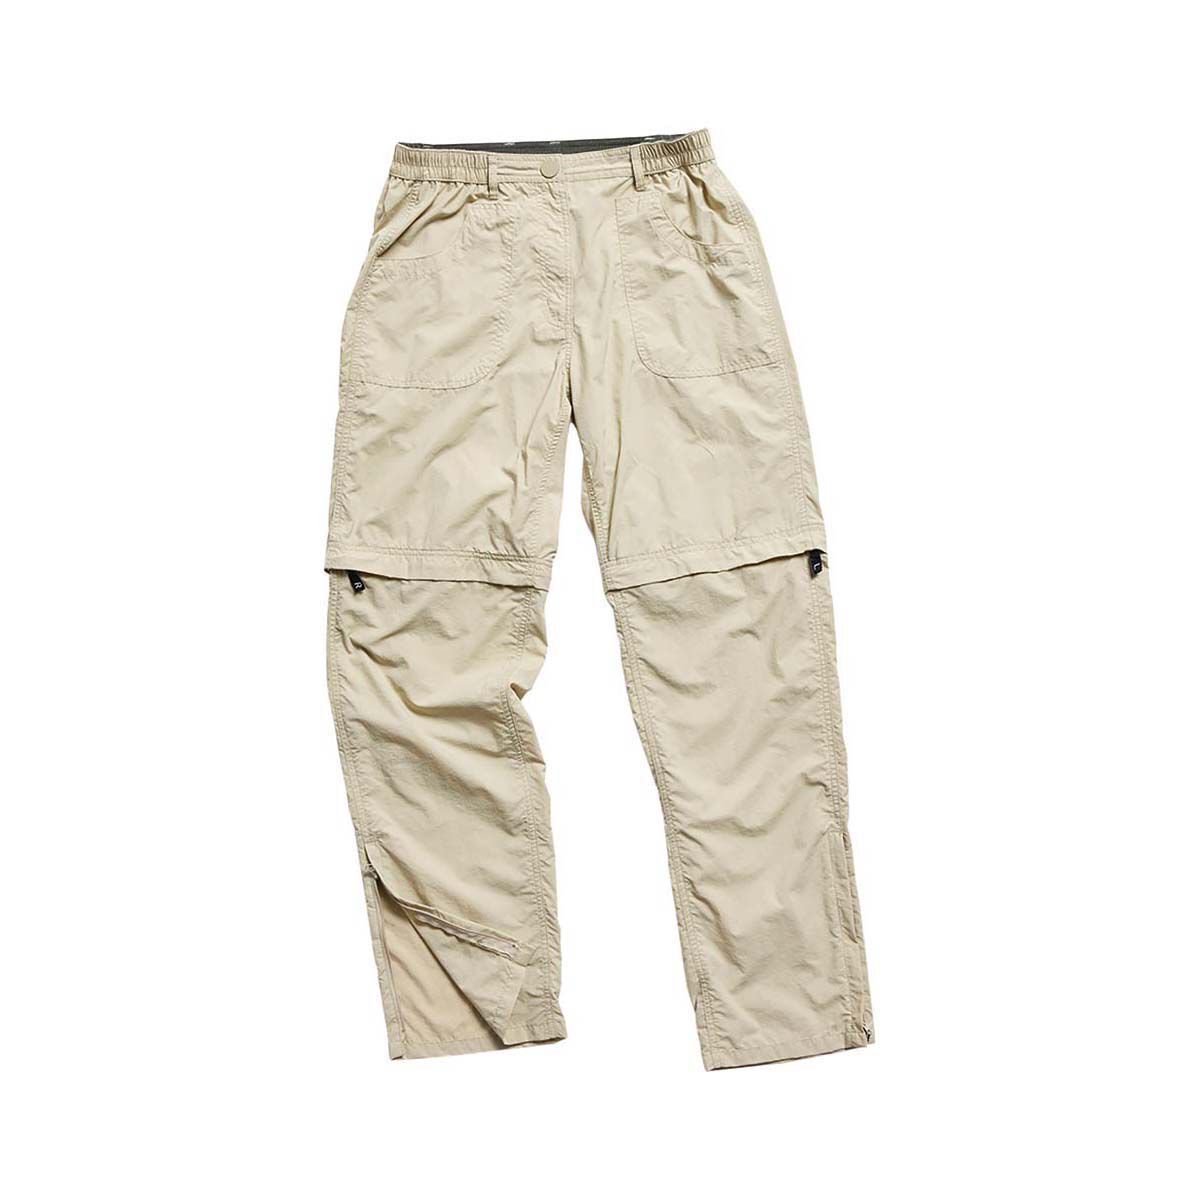 Hiking Pants for Women The Best Options  The Healthy